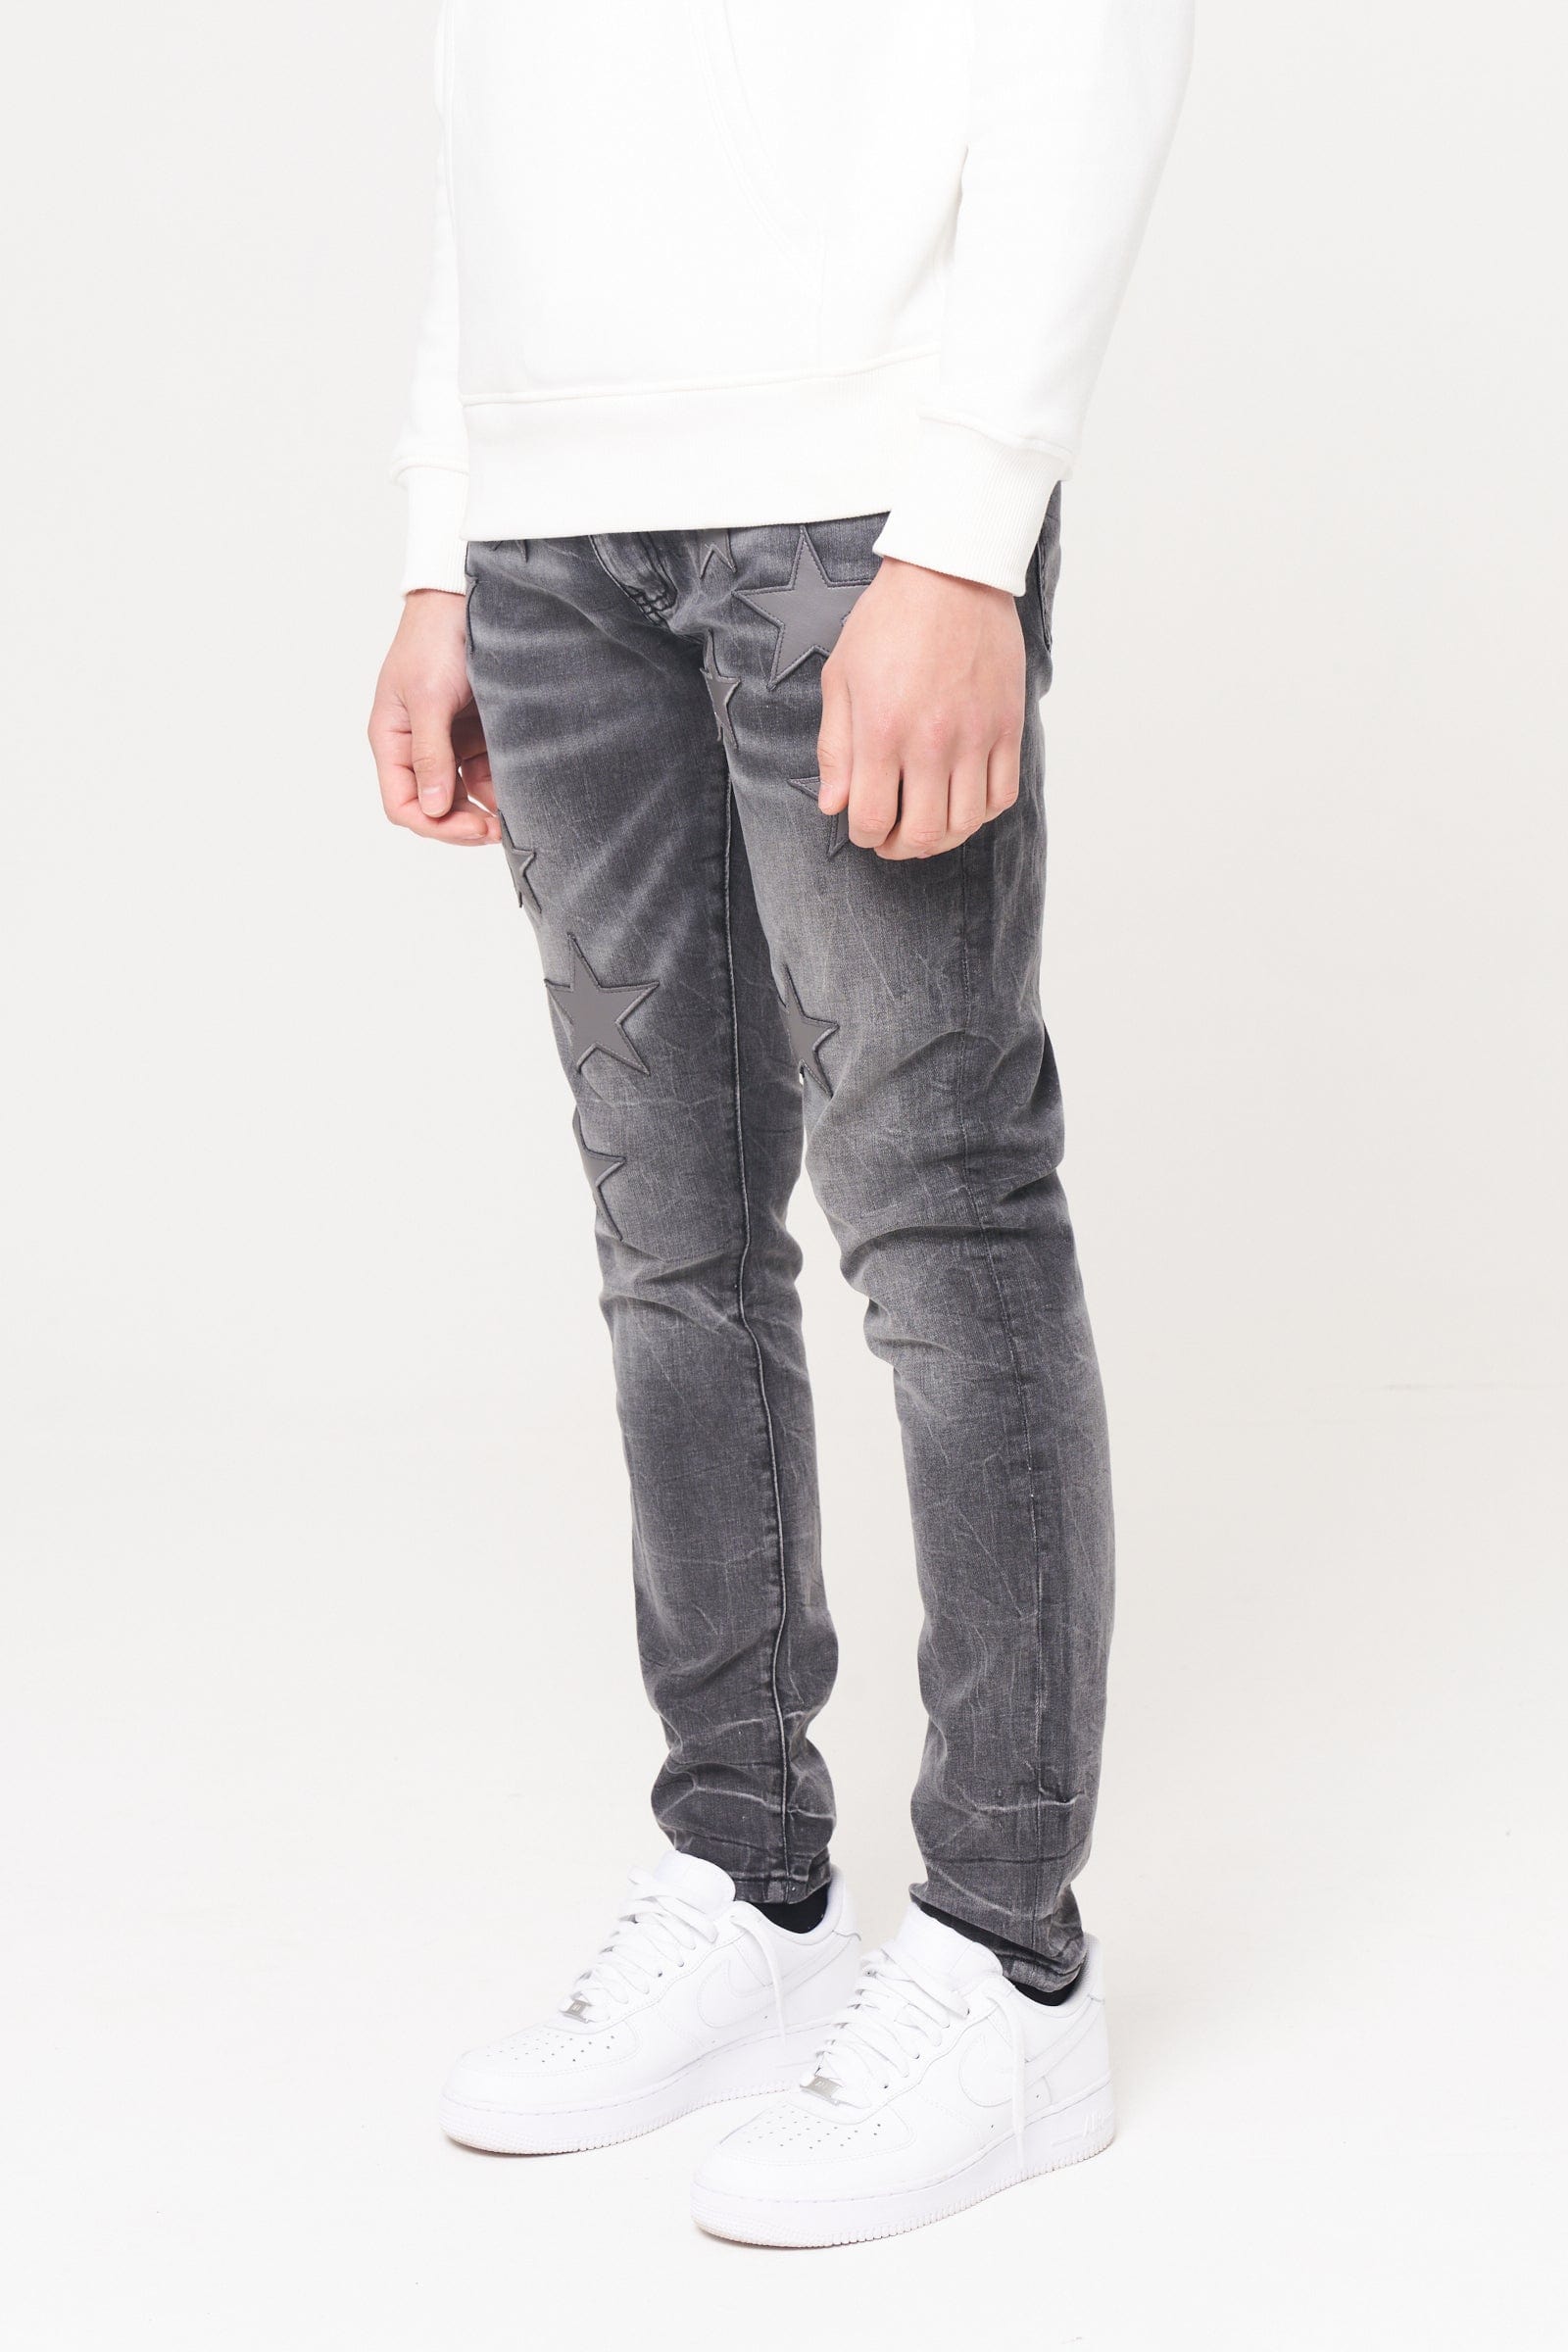 34 Heritage Men's Charisma Relaxed Straight Leg Jeans In Light Grey Urban